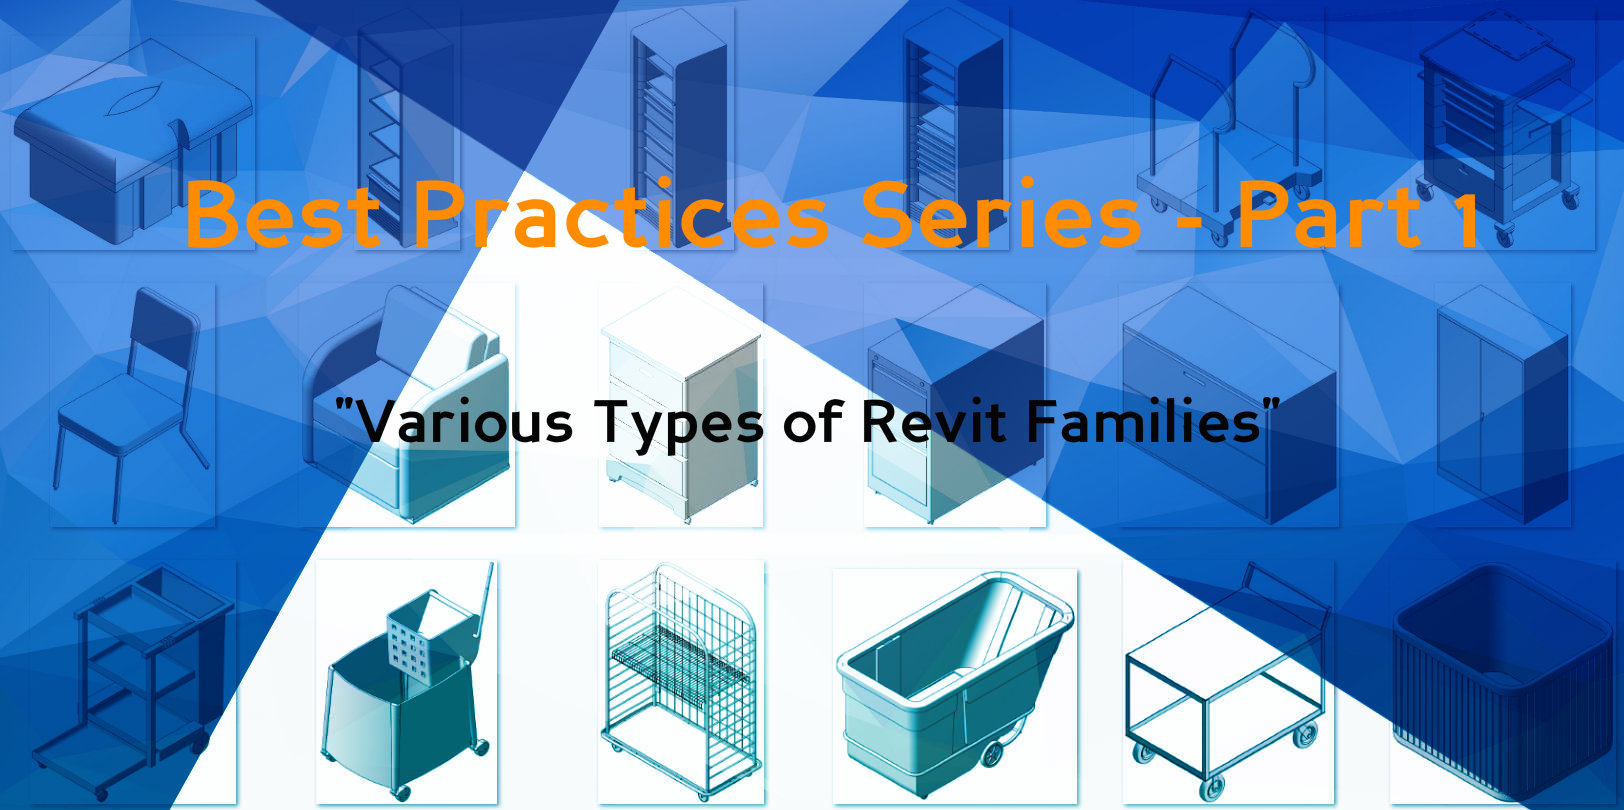 Best Practices for Revit Family Creation - Type of Revit Families